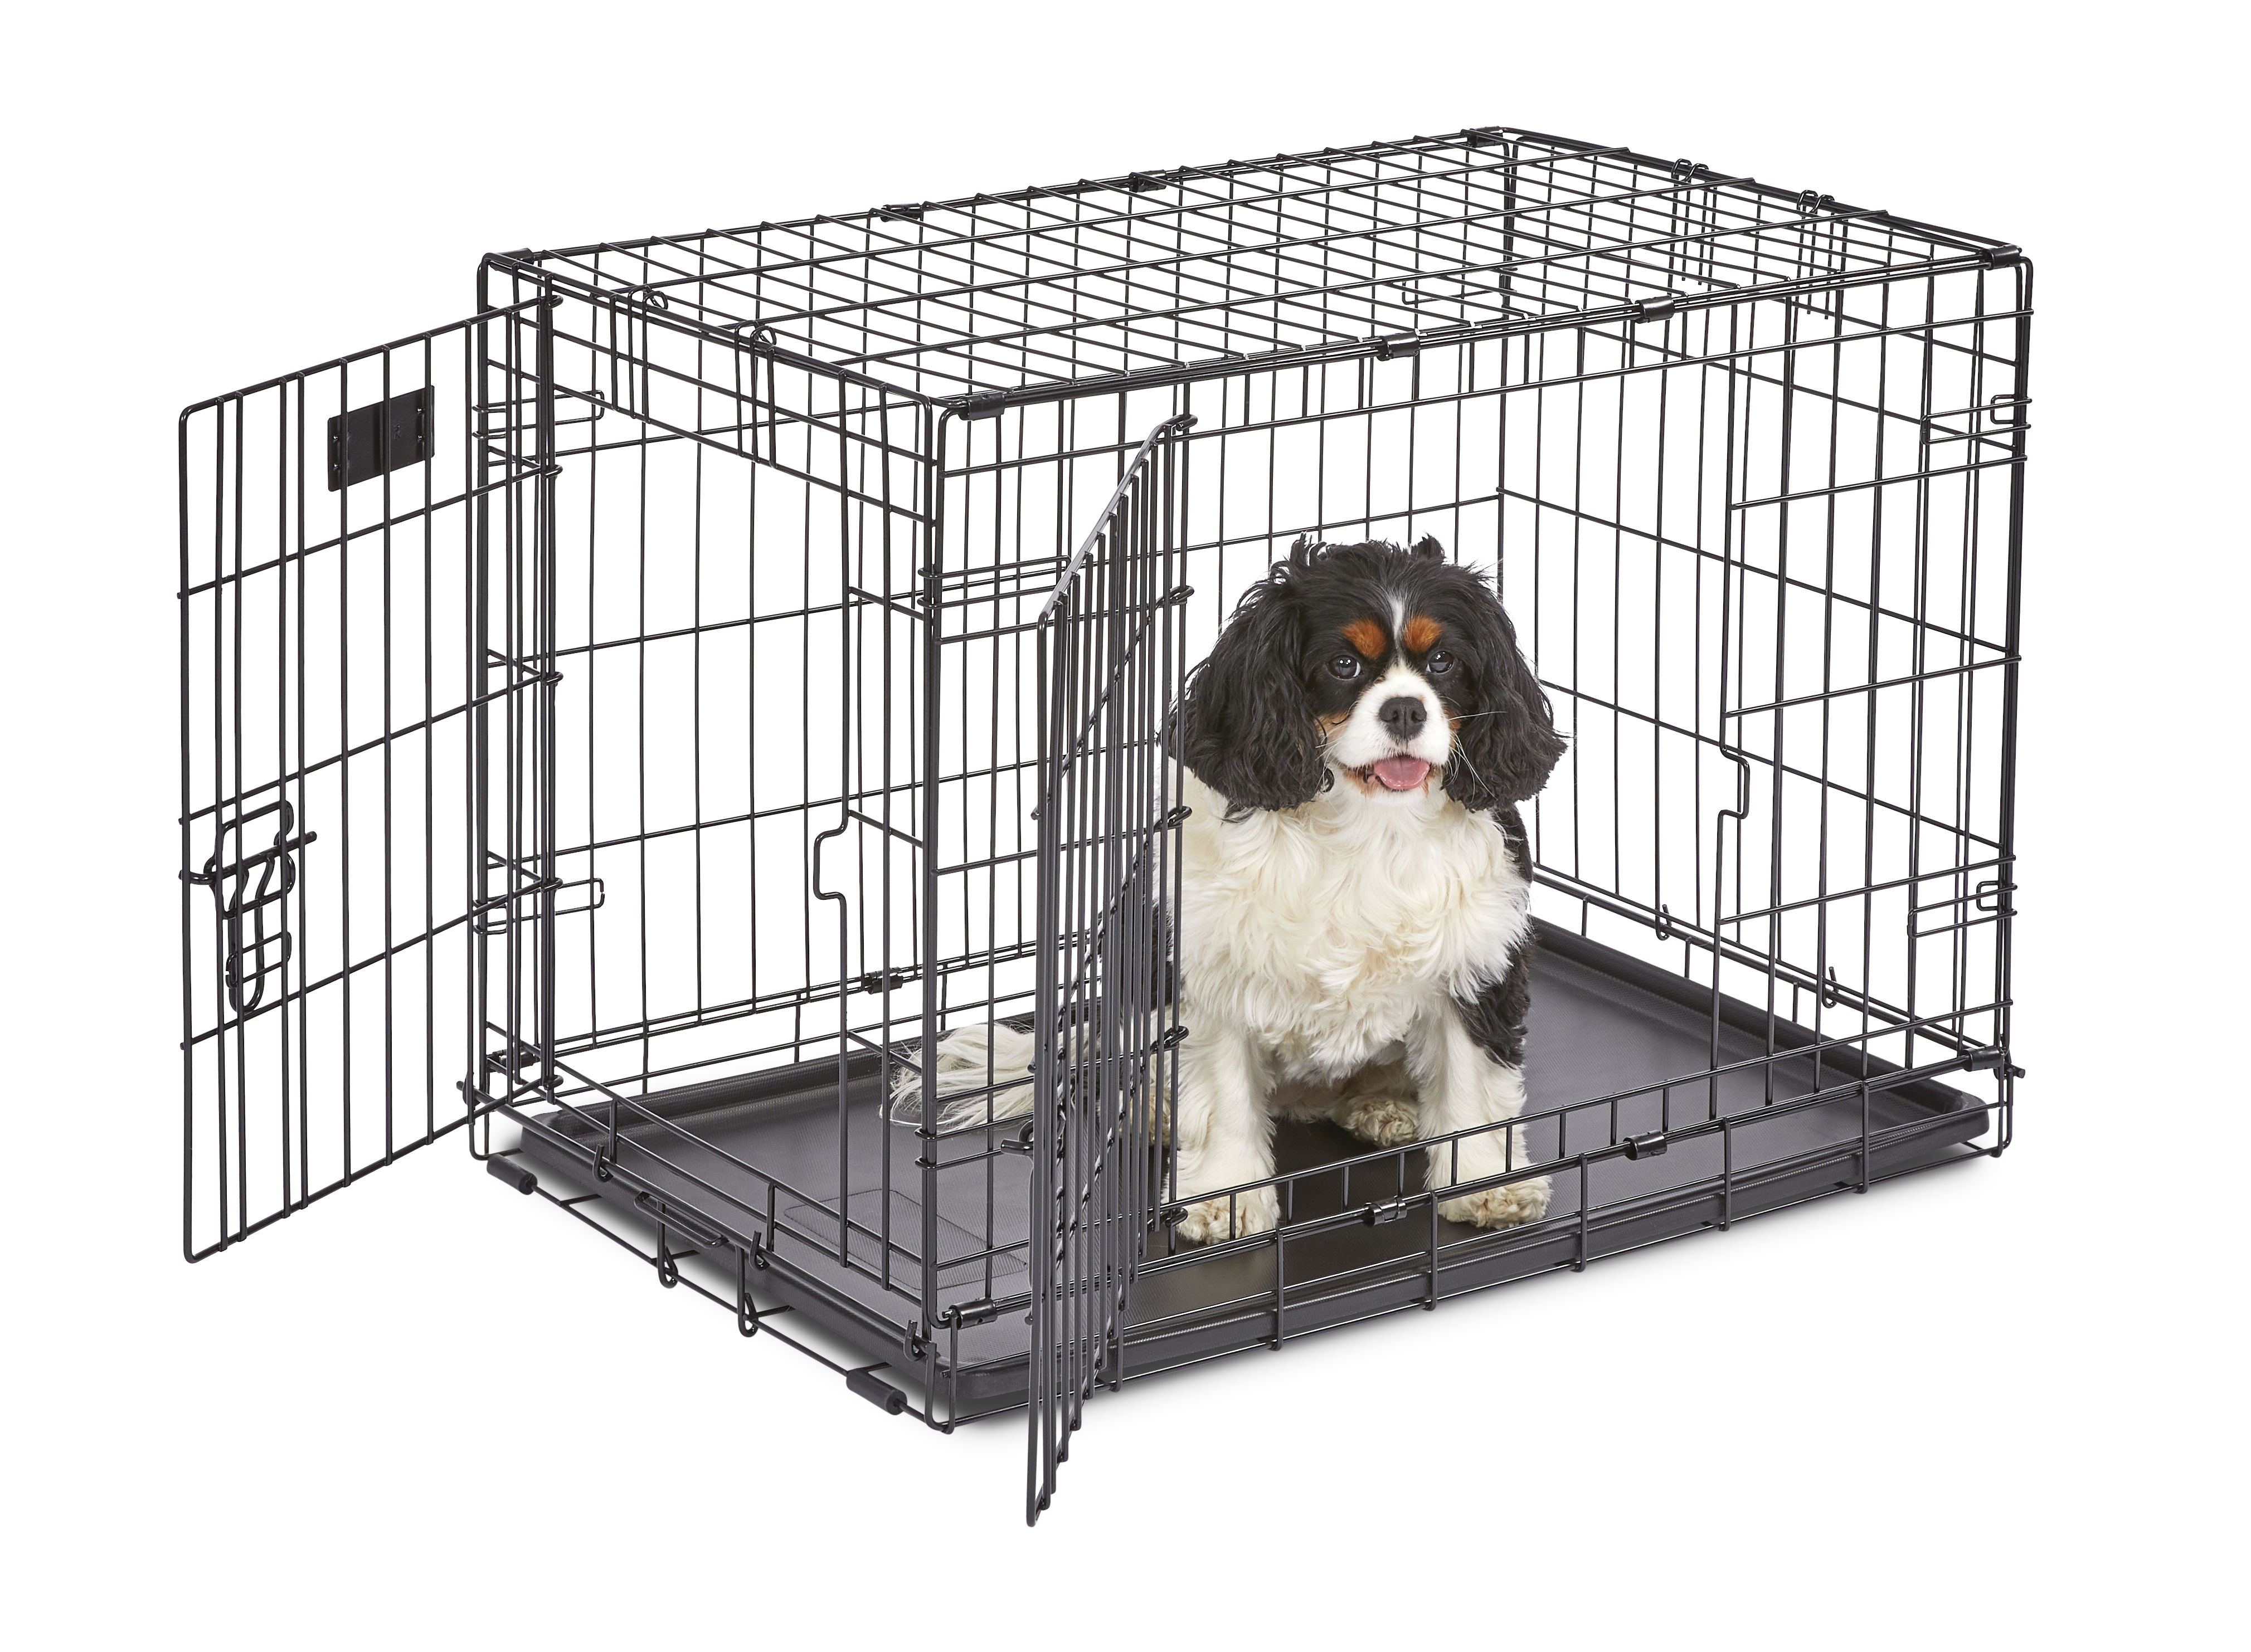 Medium Dog Crate | MidWest iCrate 30" Double Door Folding Metal Dog Crate | Divider Panel, Floor Protecting Feet & Dog Pan | 30L x 19W x 21H Inches, Medium Dog Breed - image 1 of 7